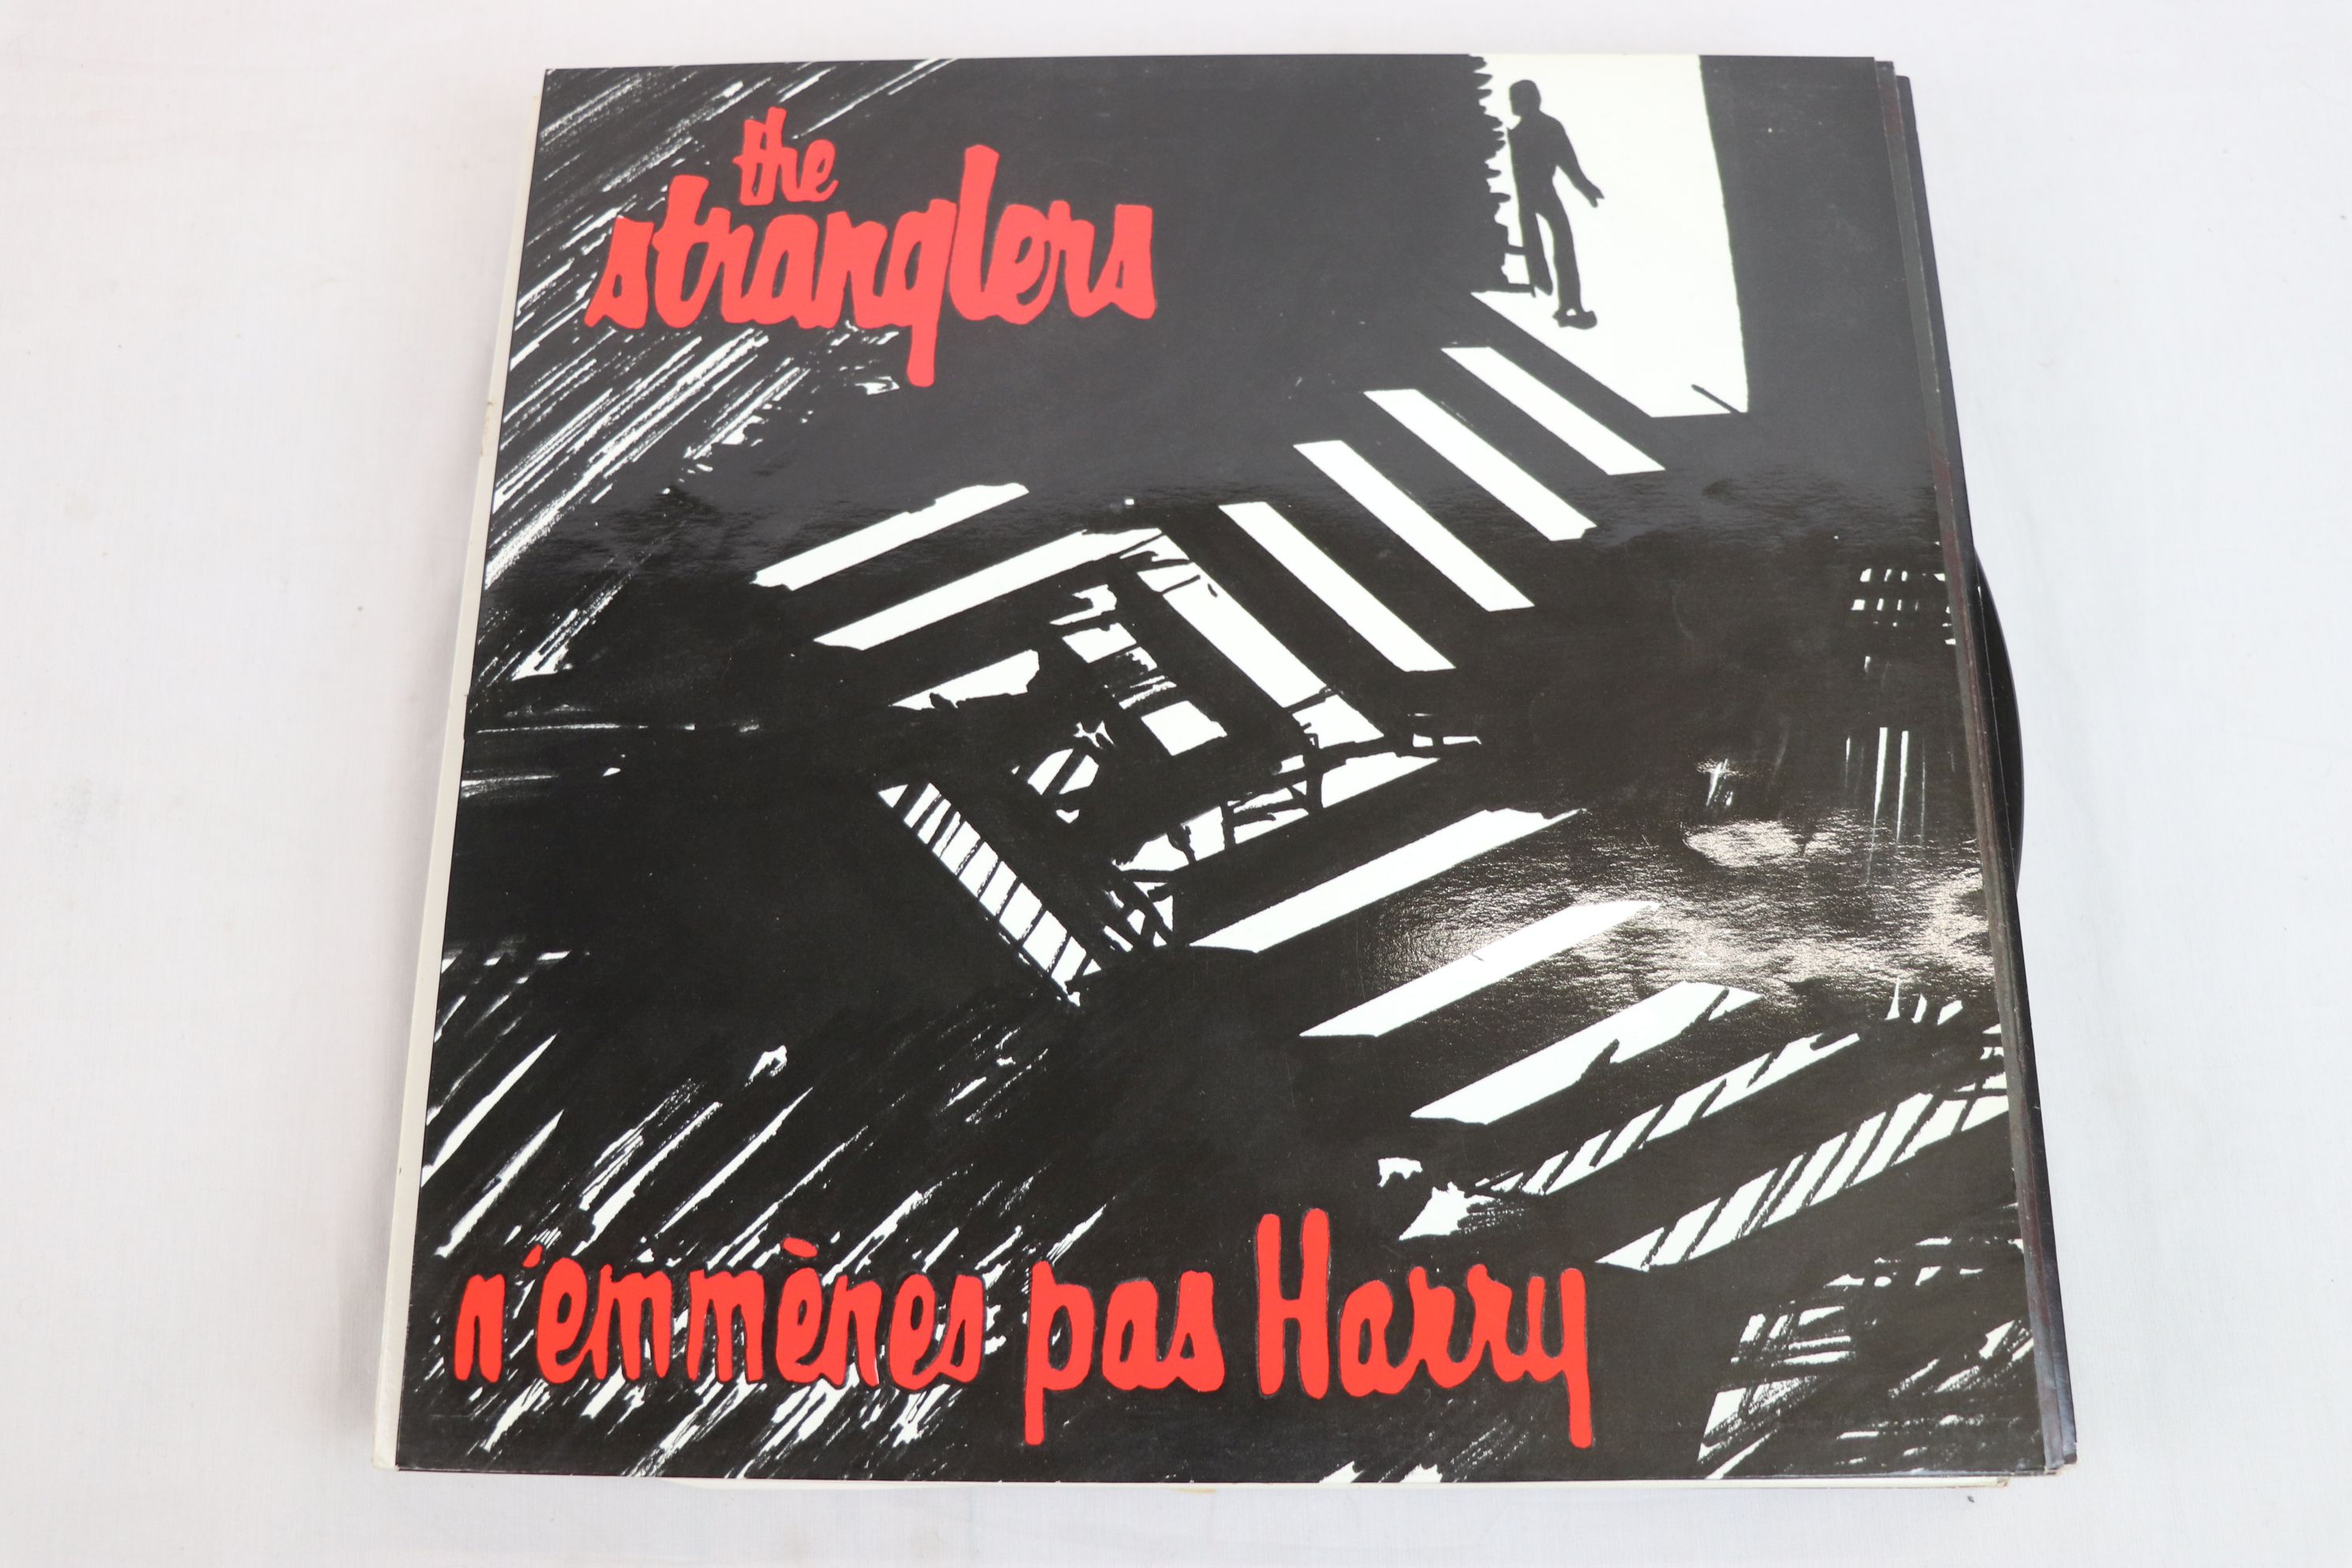 Vinyl - The Stranglers - Collection of 24 x 12" Singles, 3 x picture discs and 3 x LPs (The Raven, - Image 8 of 12